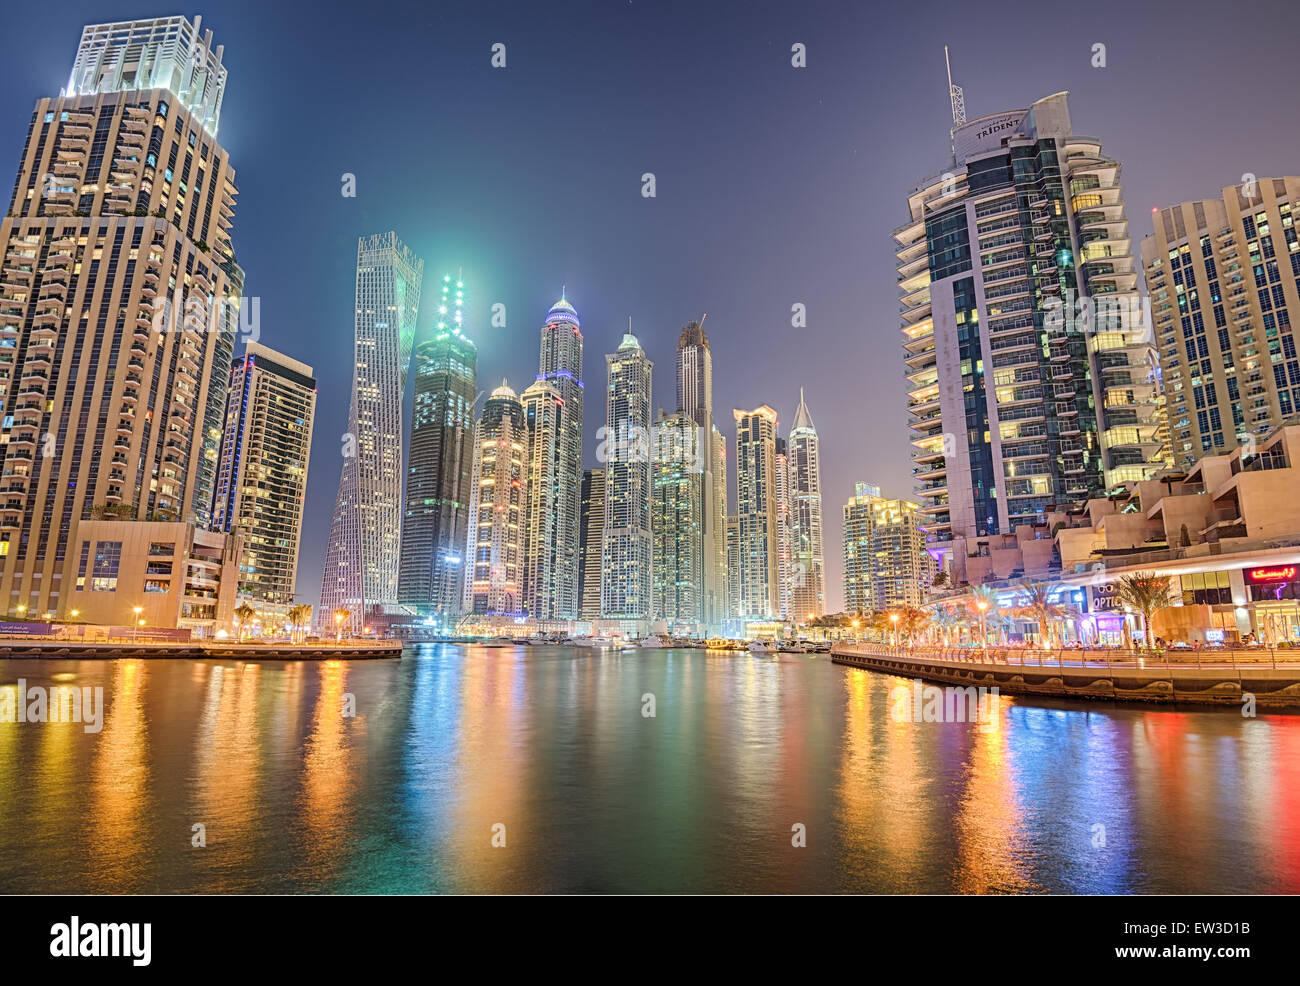 Modern buildings in Dubai Marina district at night. Hdr processed. Stock Photo